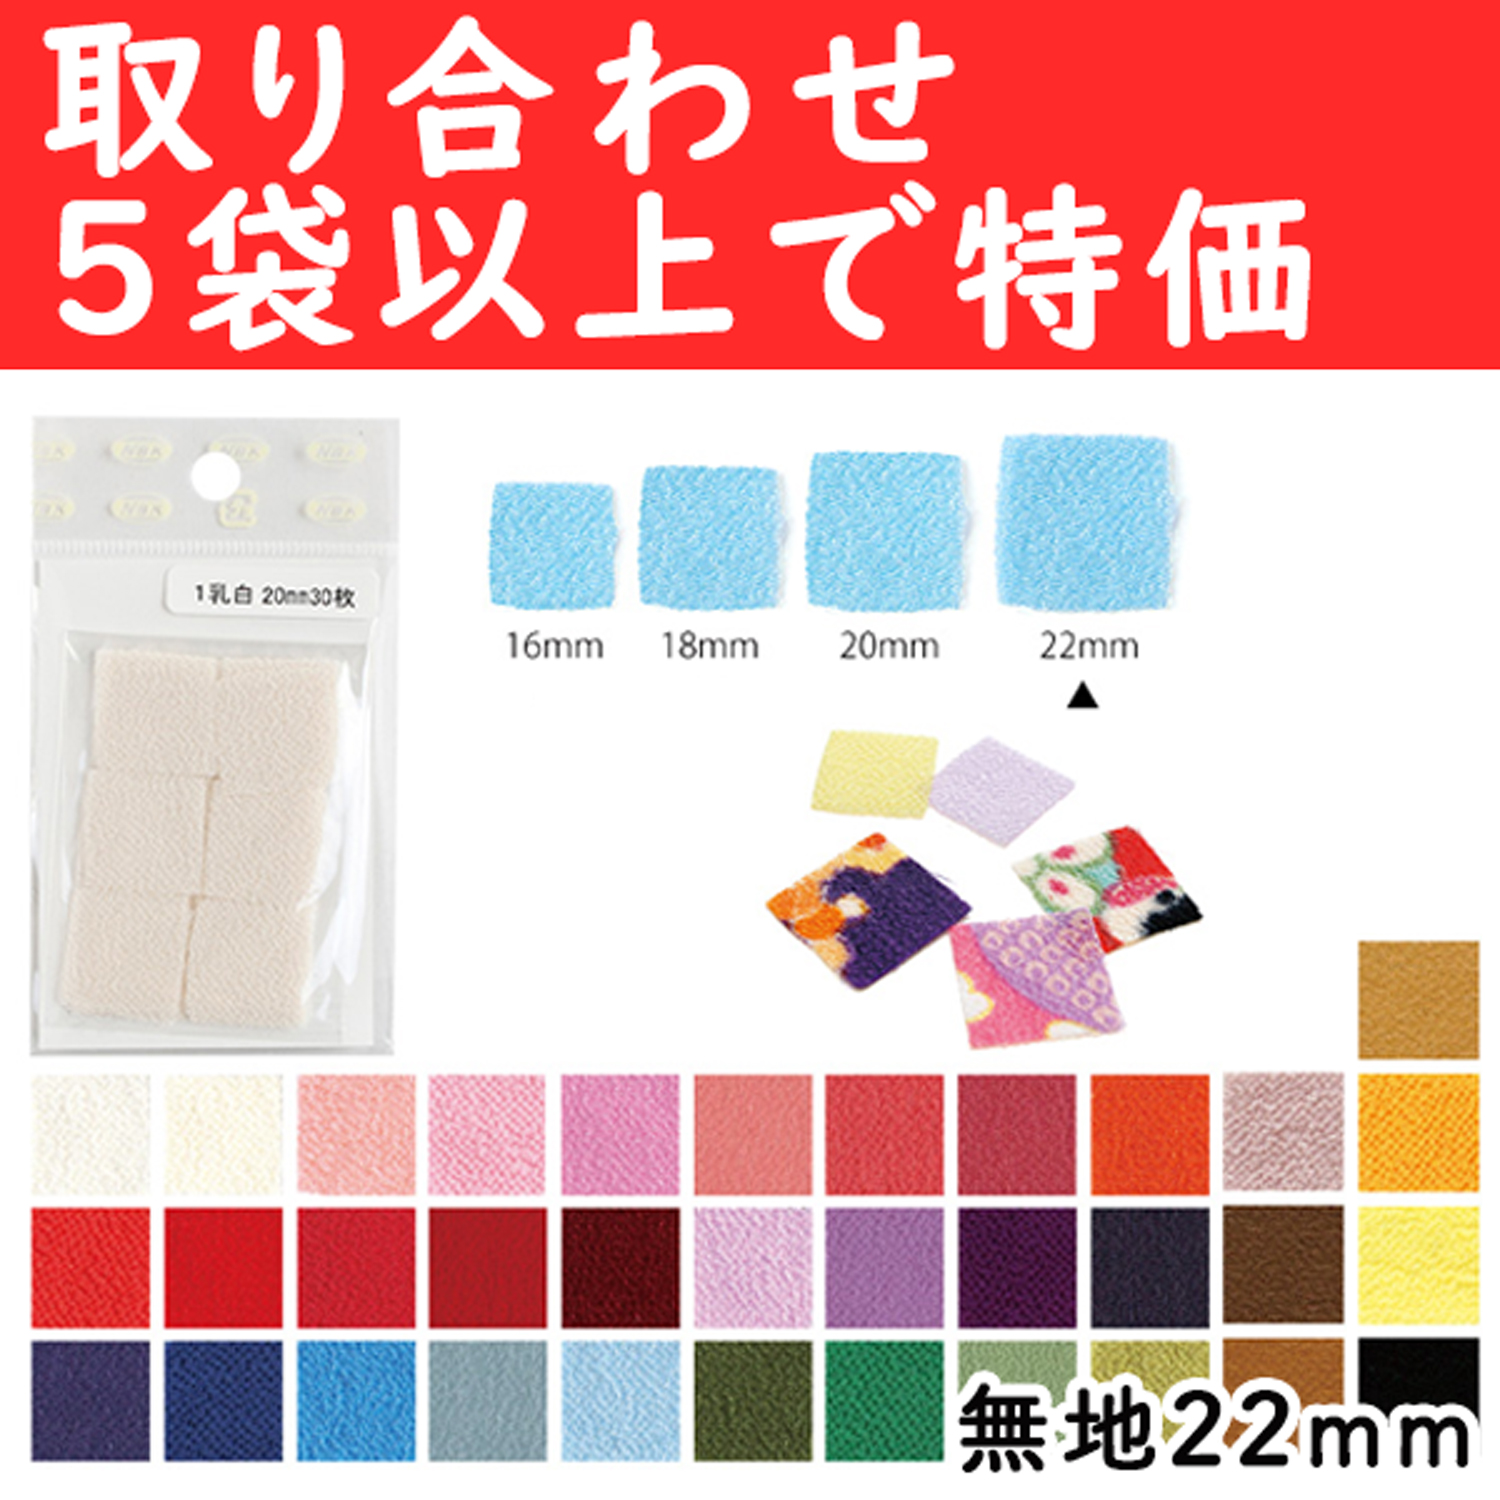 S50CH22-OVER5 Tsumami Crafting Crepe 22mm 30pcs over 5 pack more (pack)